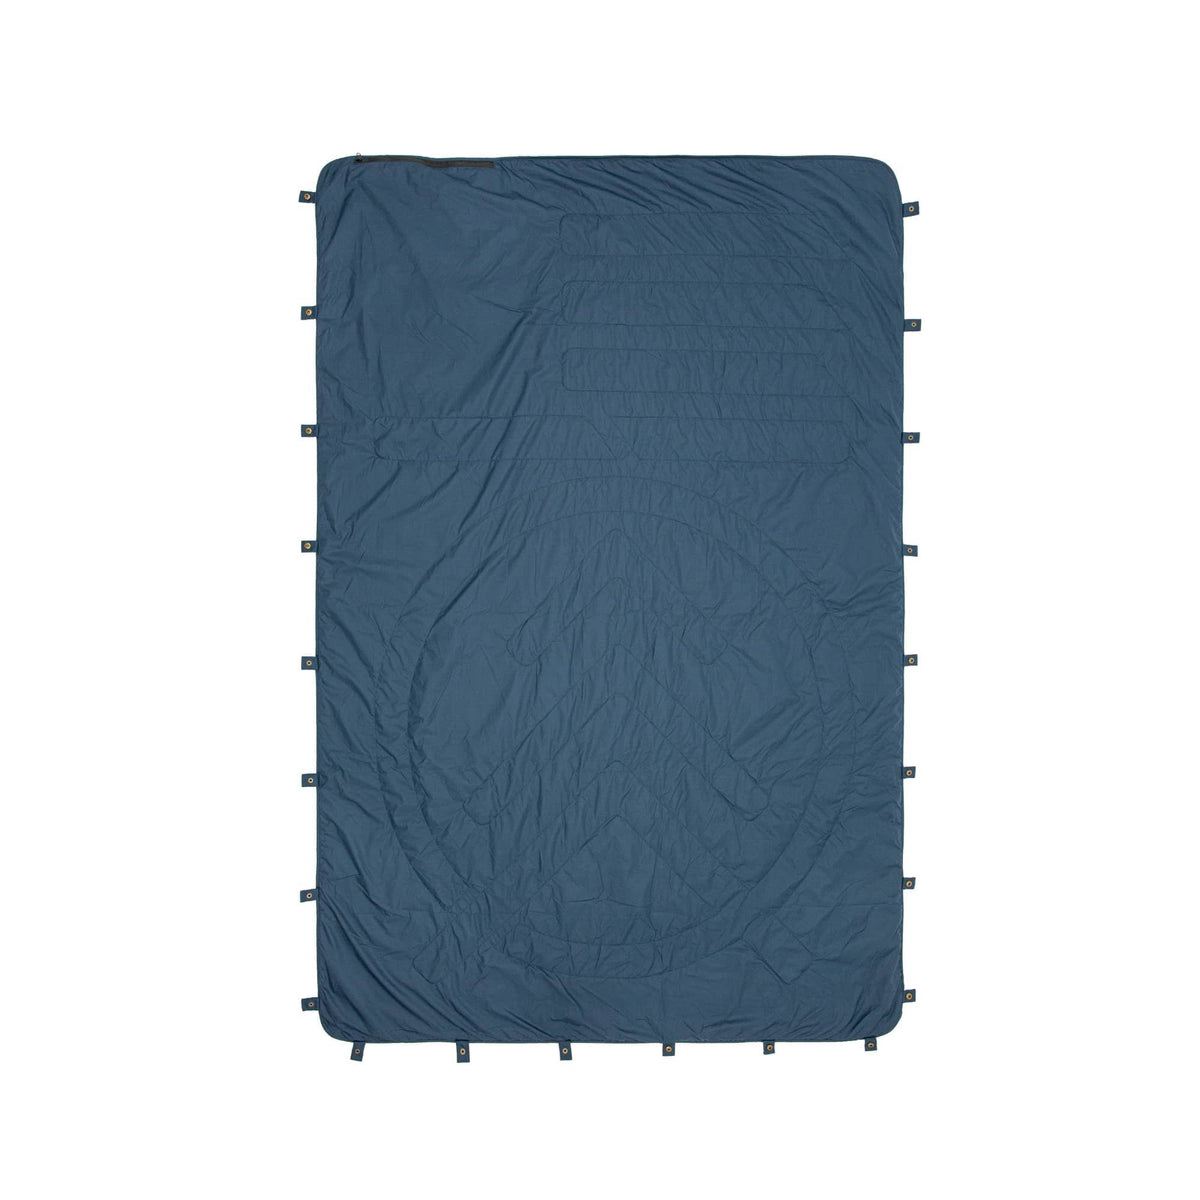 CloudTouch™ Attachable Blanket Liner